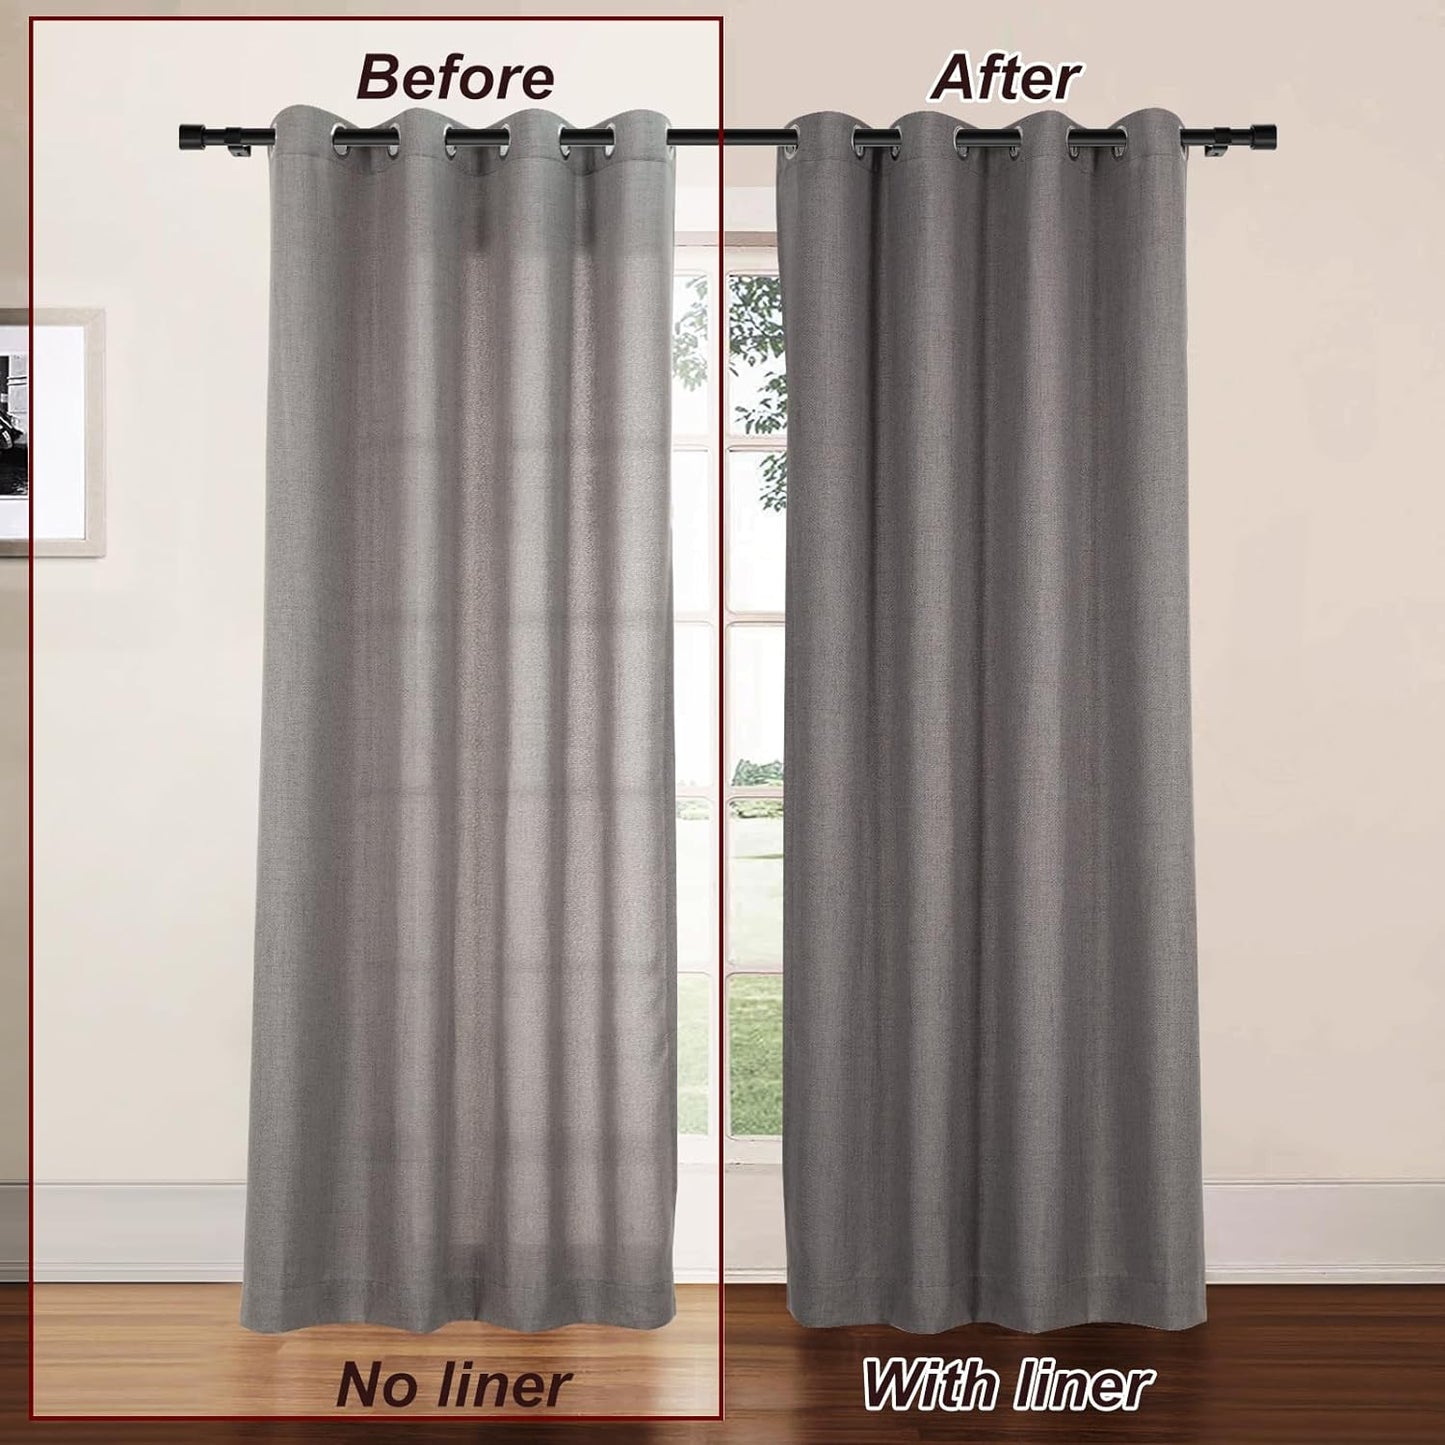 INOVADAY Blackout Curtain Liners 2 Panels Set, Thermal Insulated Light Blocking Liners for Window Curtains 84 Inches Long with Rings (W50 X L80, White)  INOVADAY   